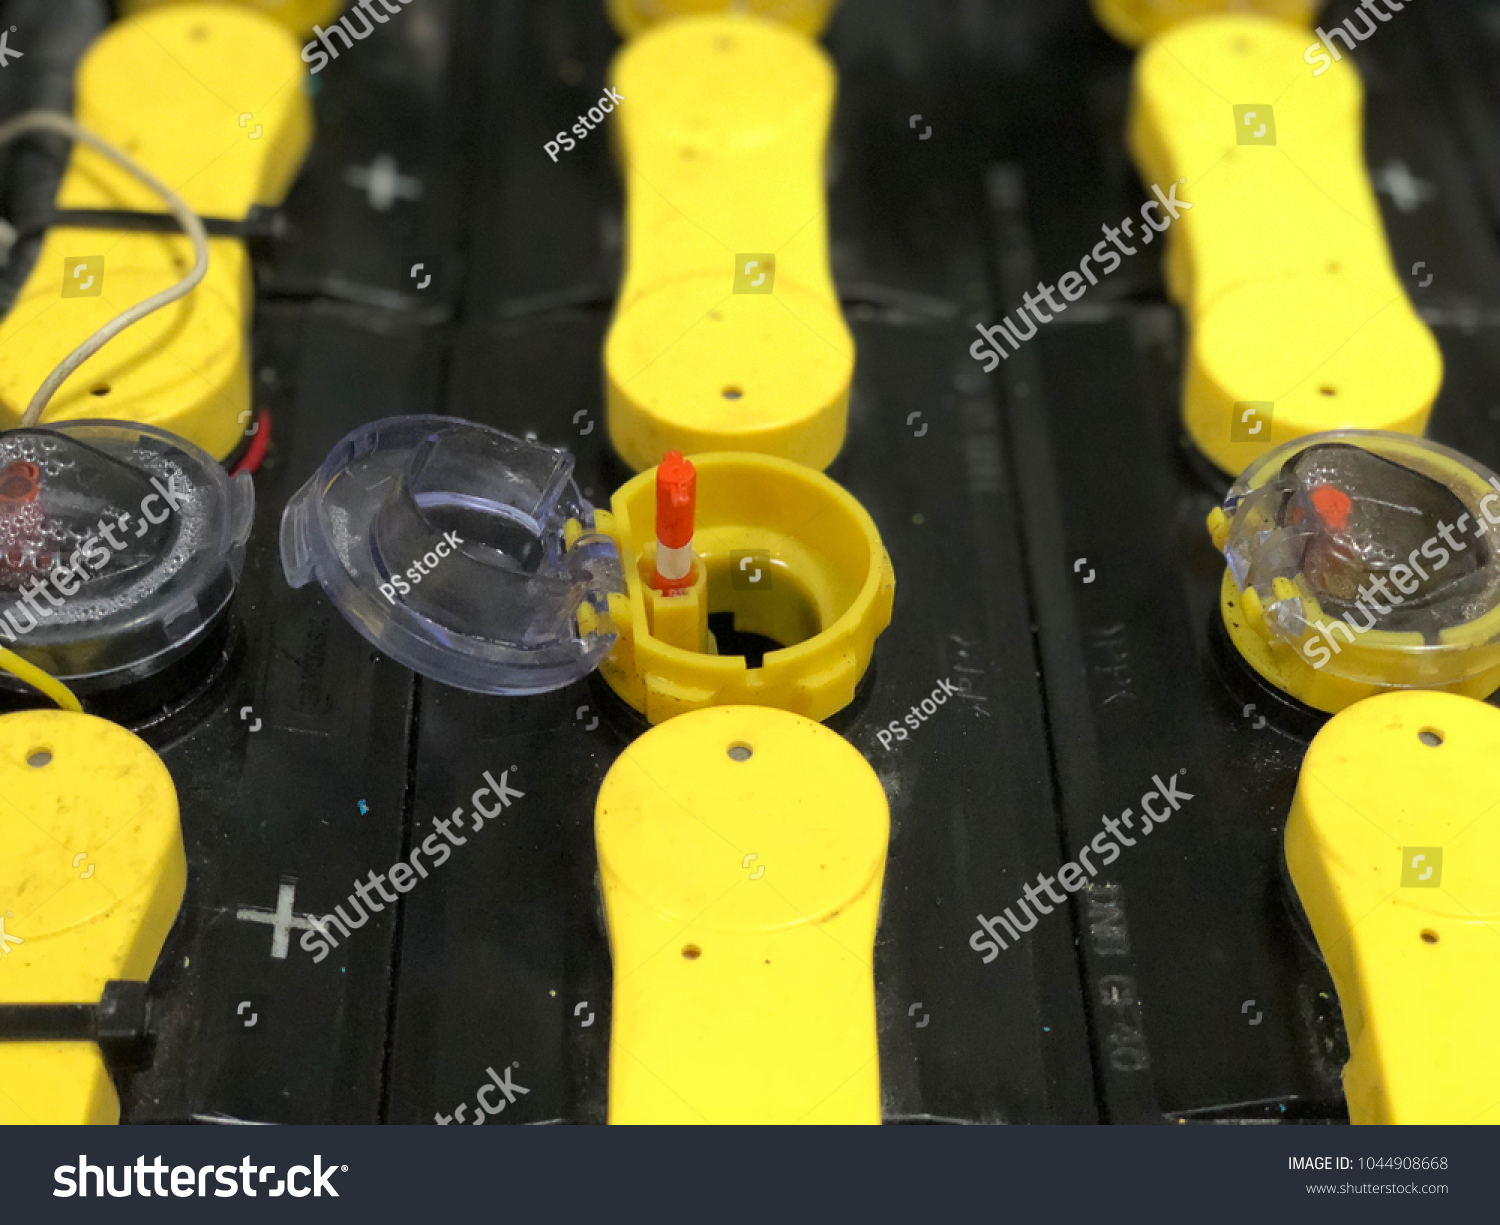 Plastic That Indicates Level Distilled Water Stock Photo Edit Now 1044908668